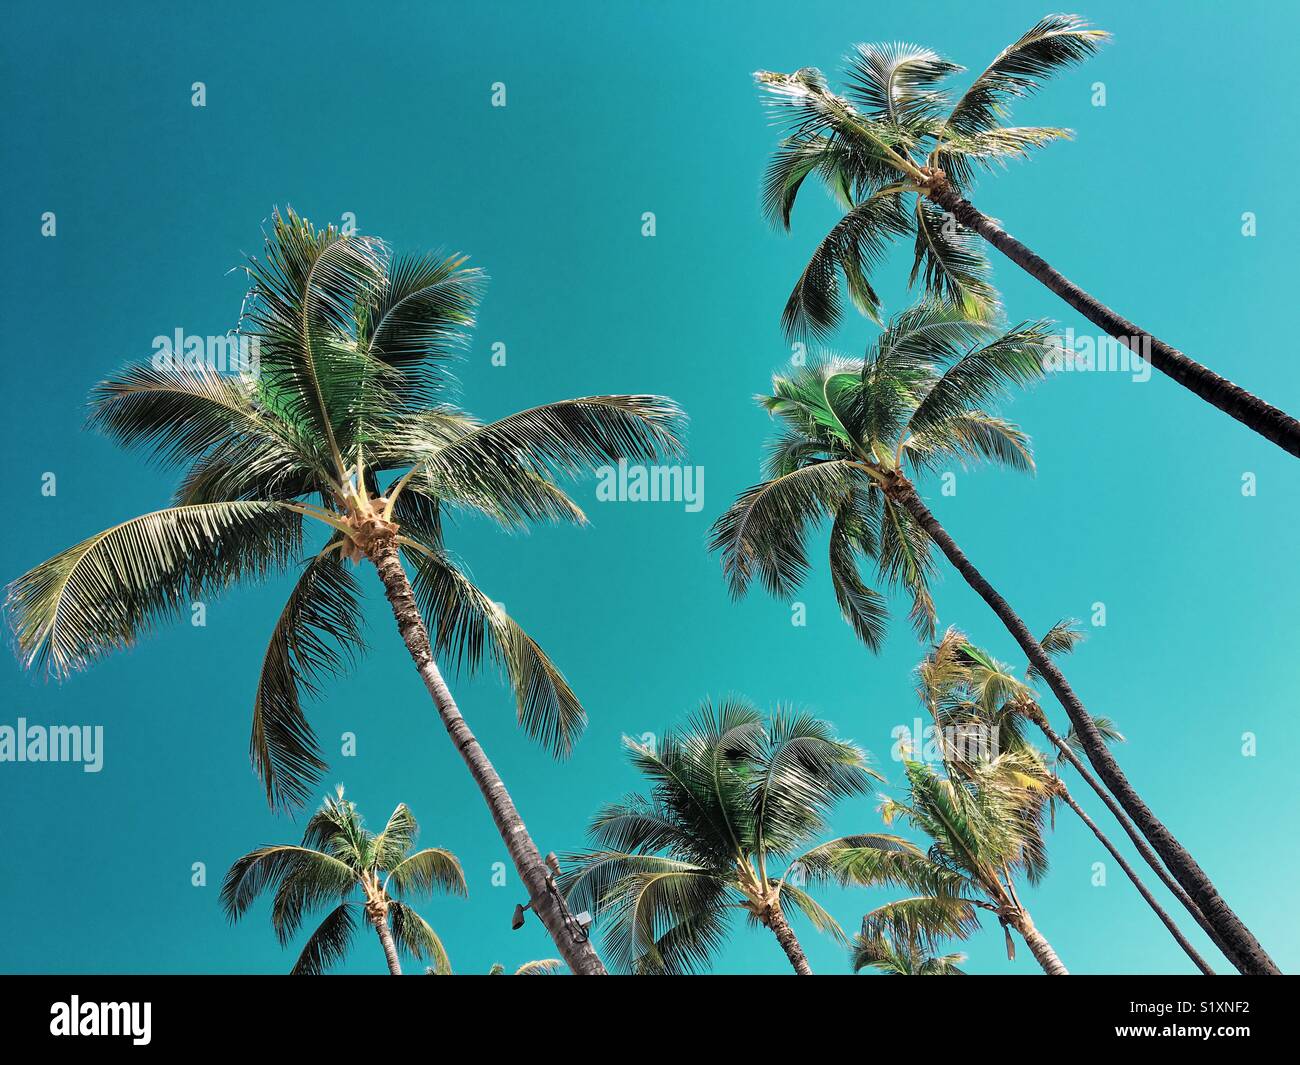 Looking up at palm trees and blue sky on a sunny day. Space for copy. Stock Photo